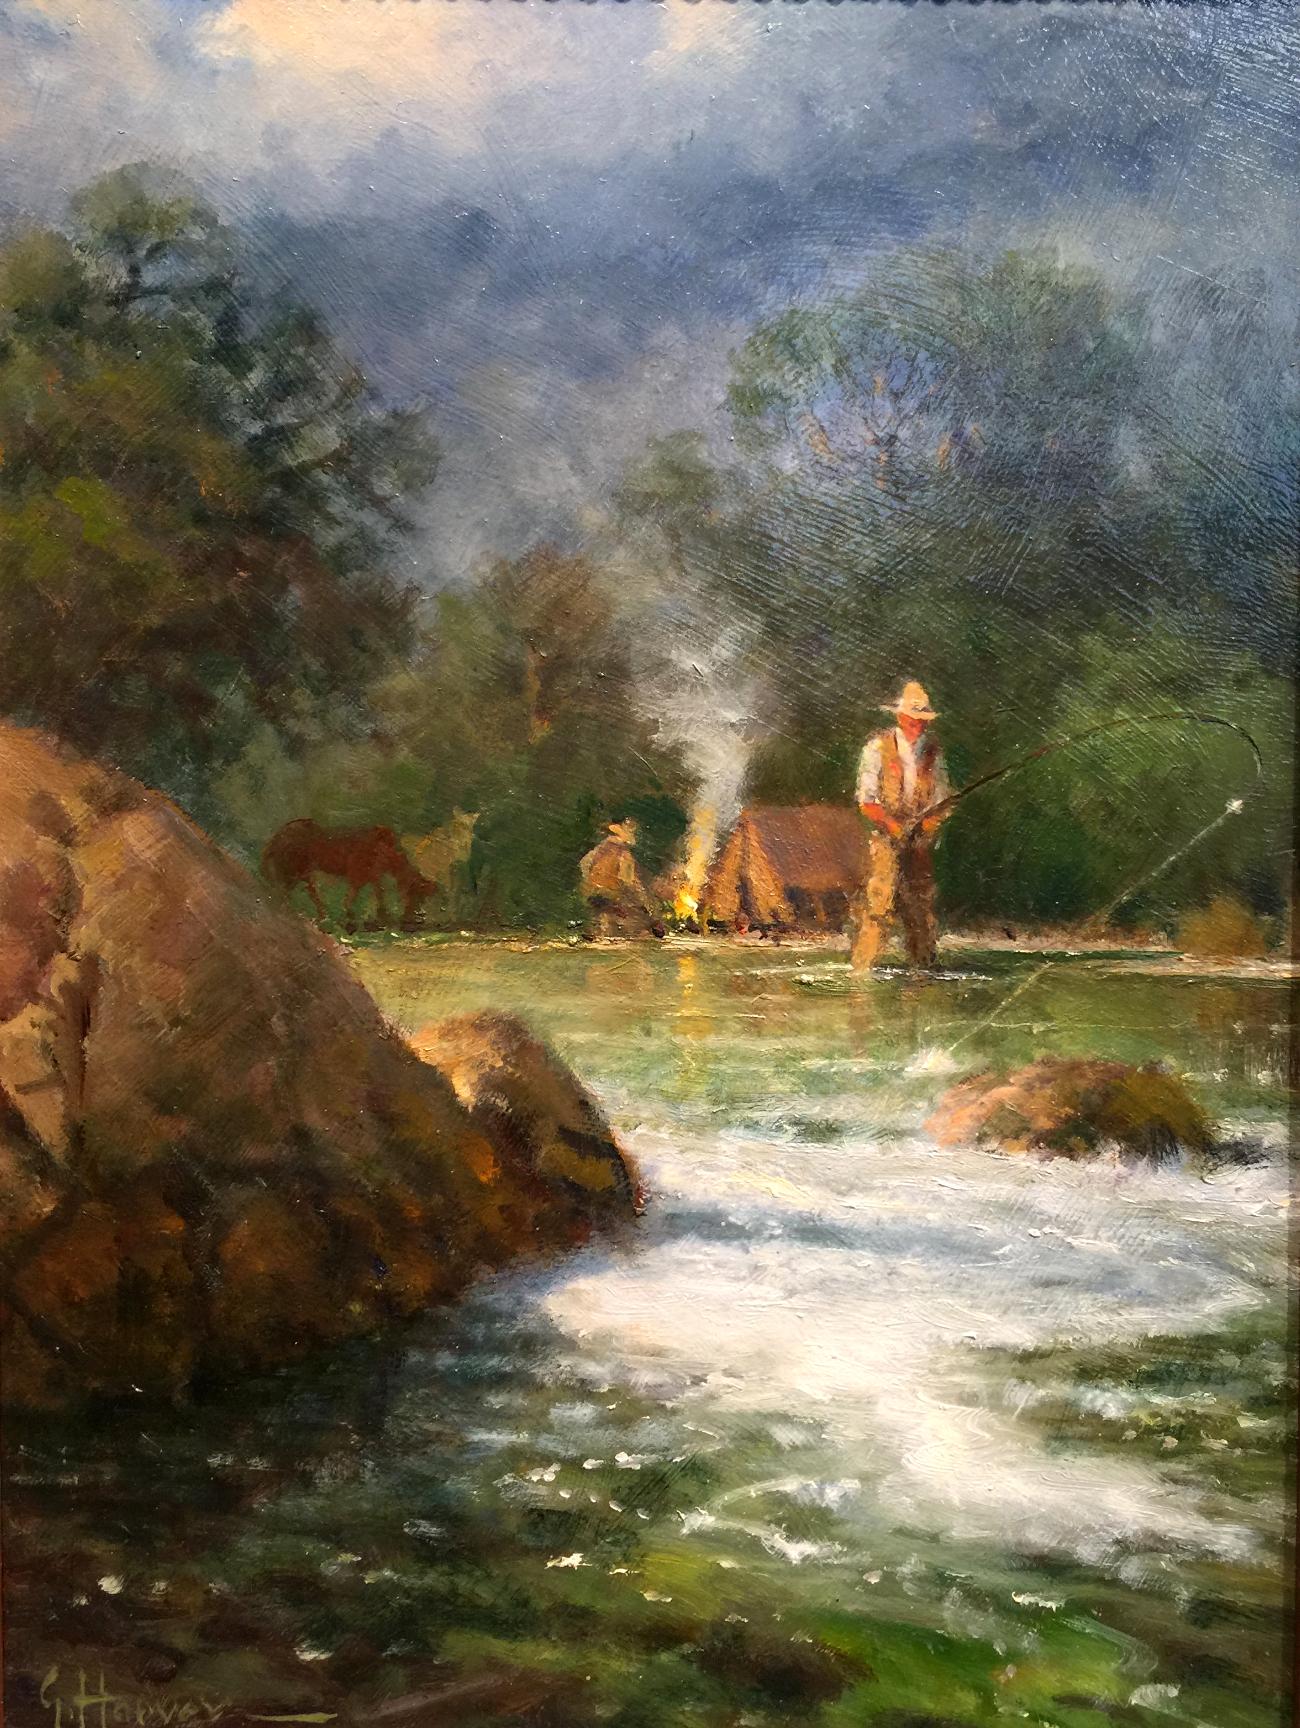 G. Harvey Landscape Painting - "Cowboy Camping" Fly Fishing